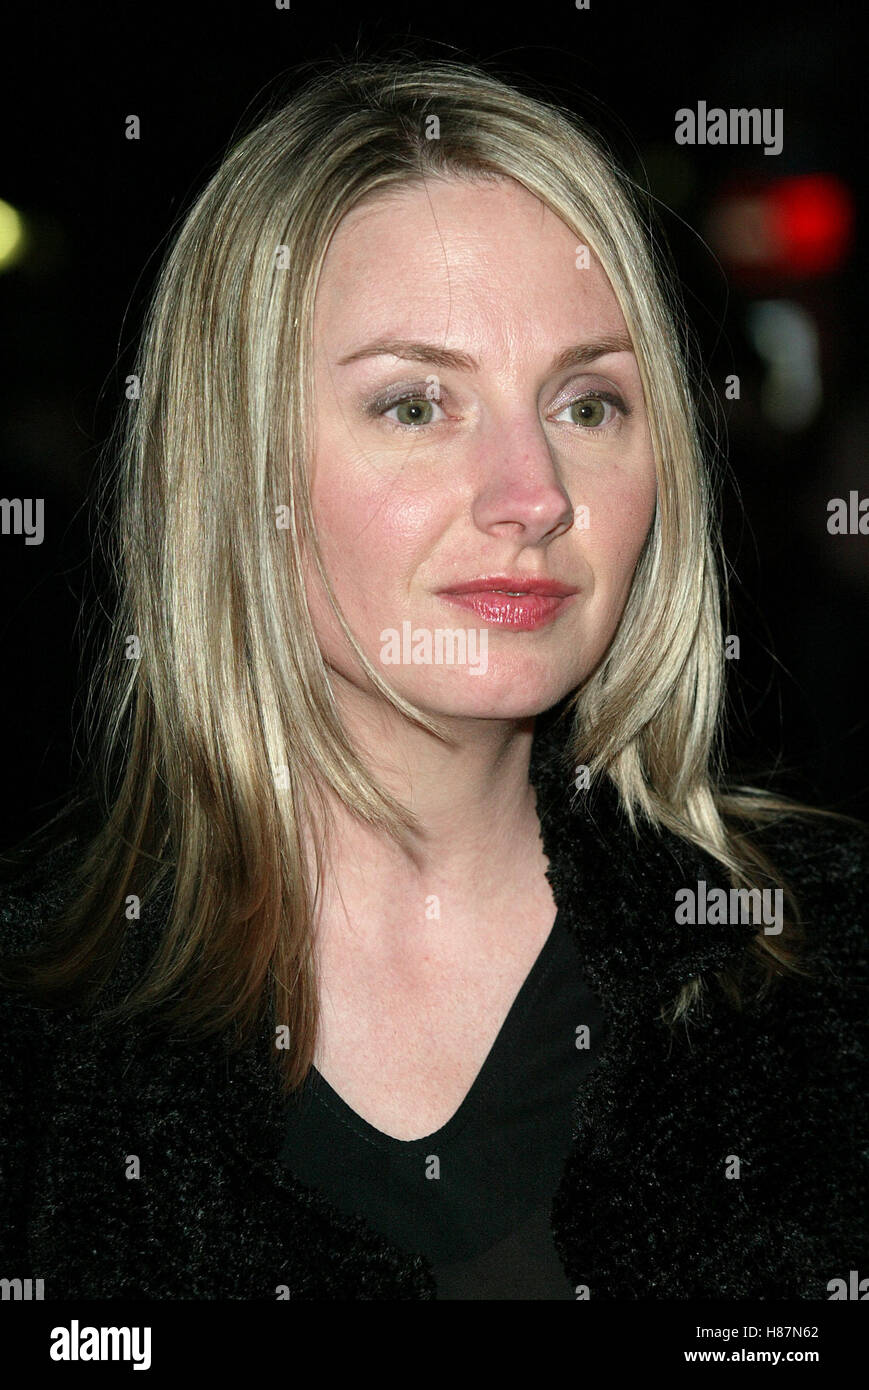 HOPE DAVIS CANNES FILM FESTIVAL CANNES FRANCE 17 May 2003 Stock Photo